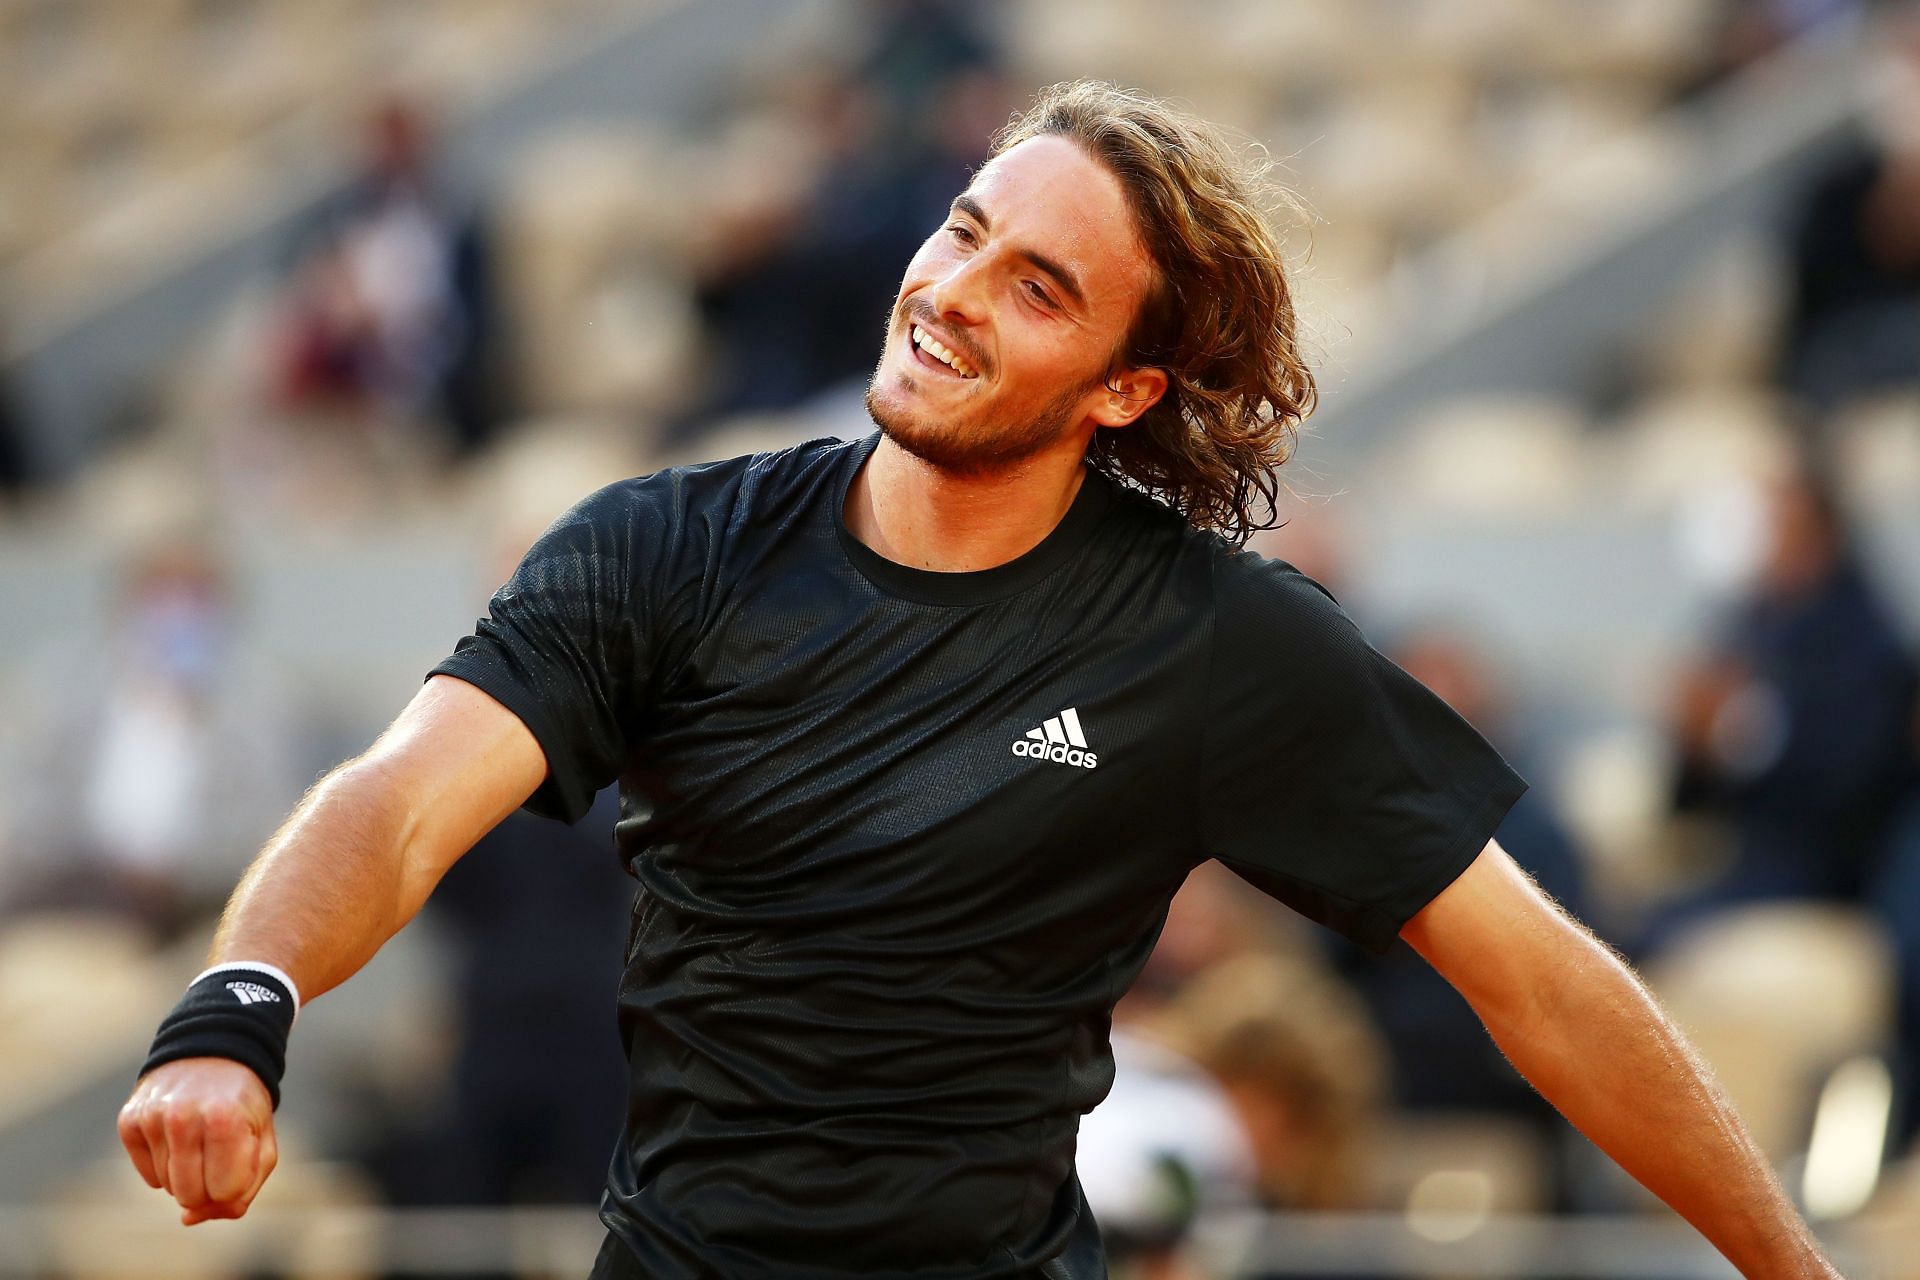 2020 French Open - Day Eleven